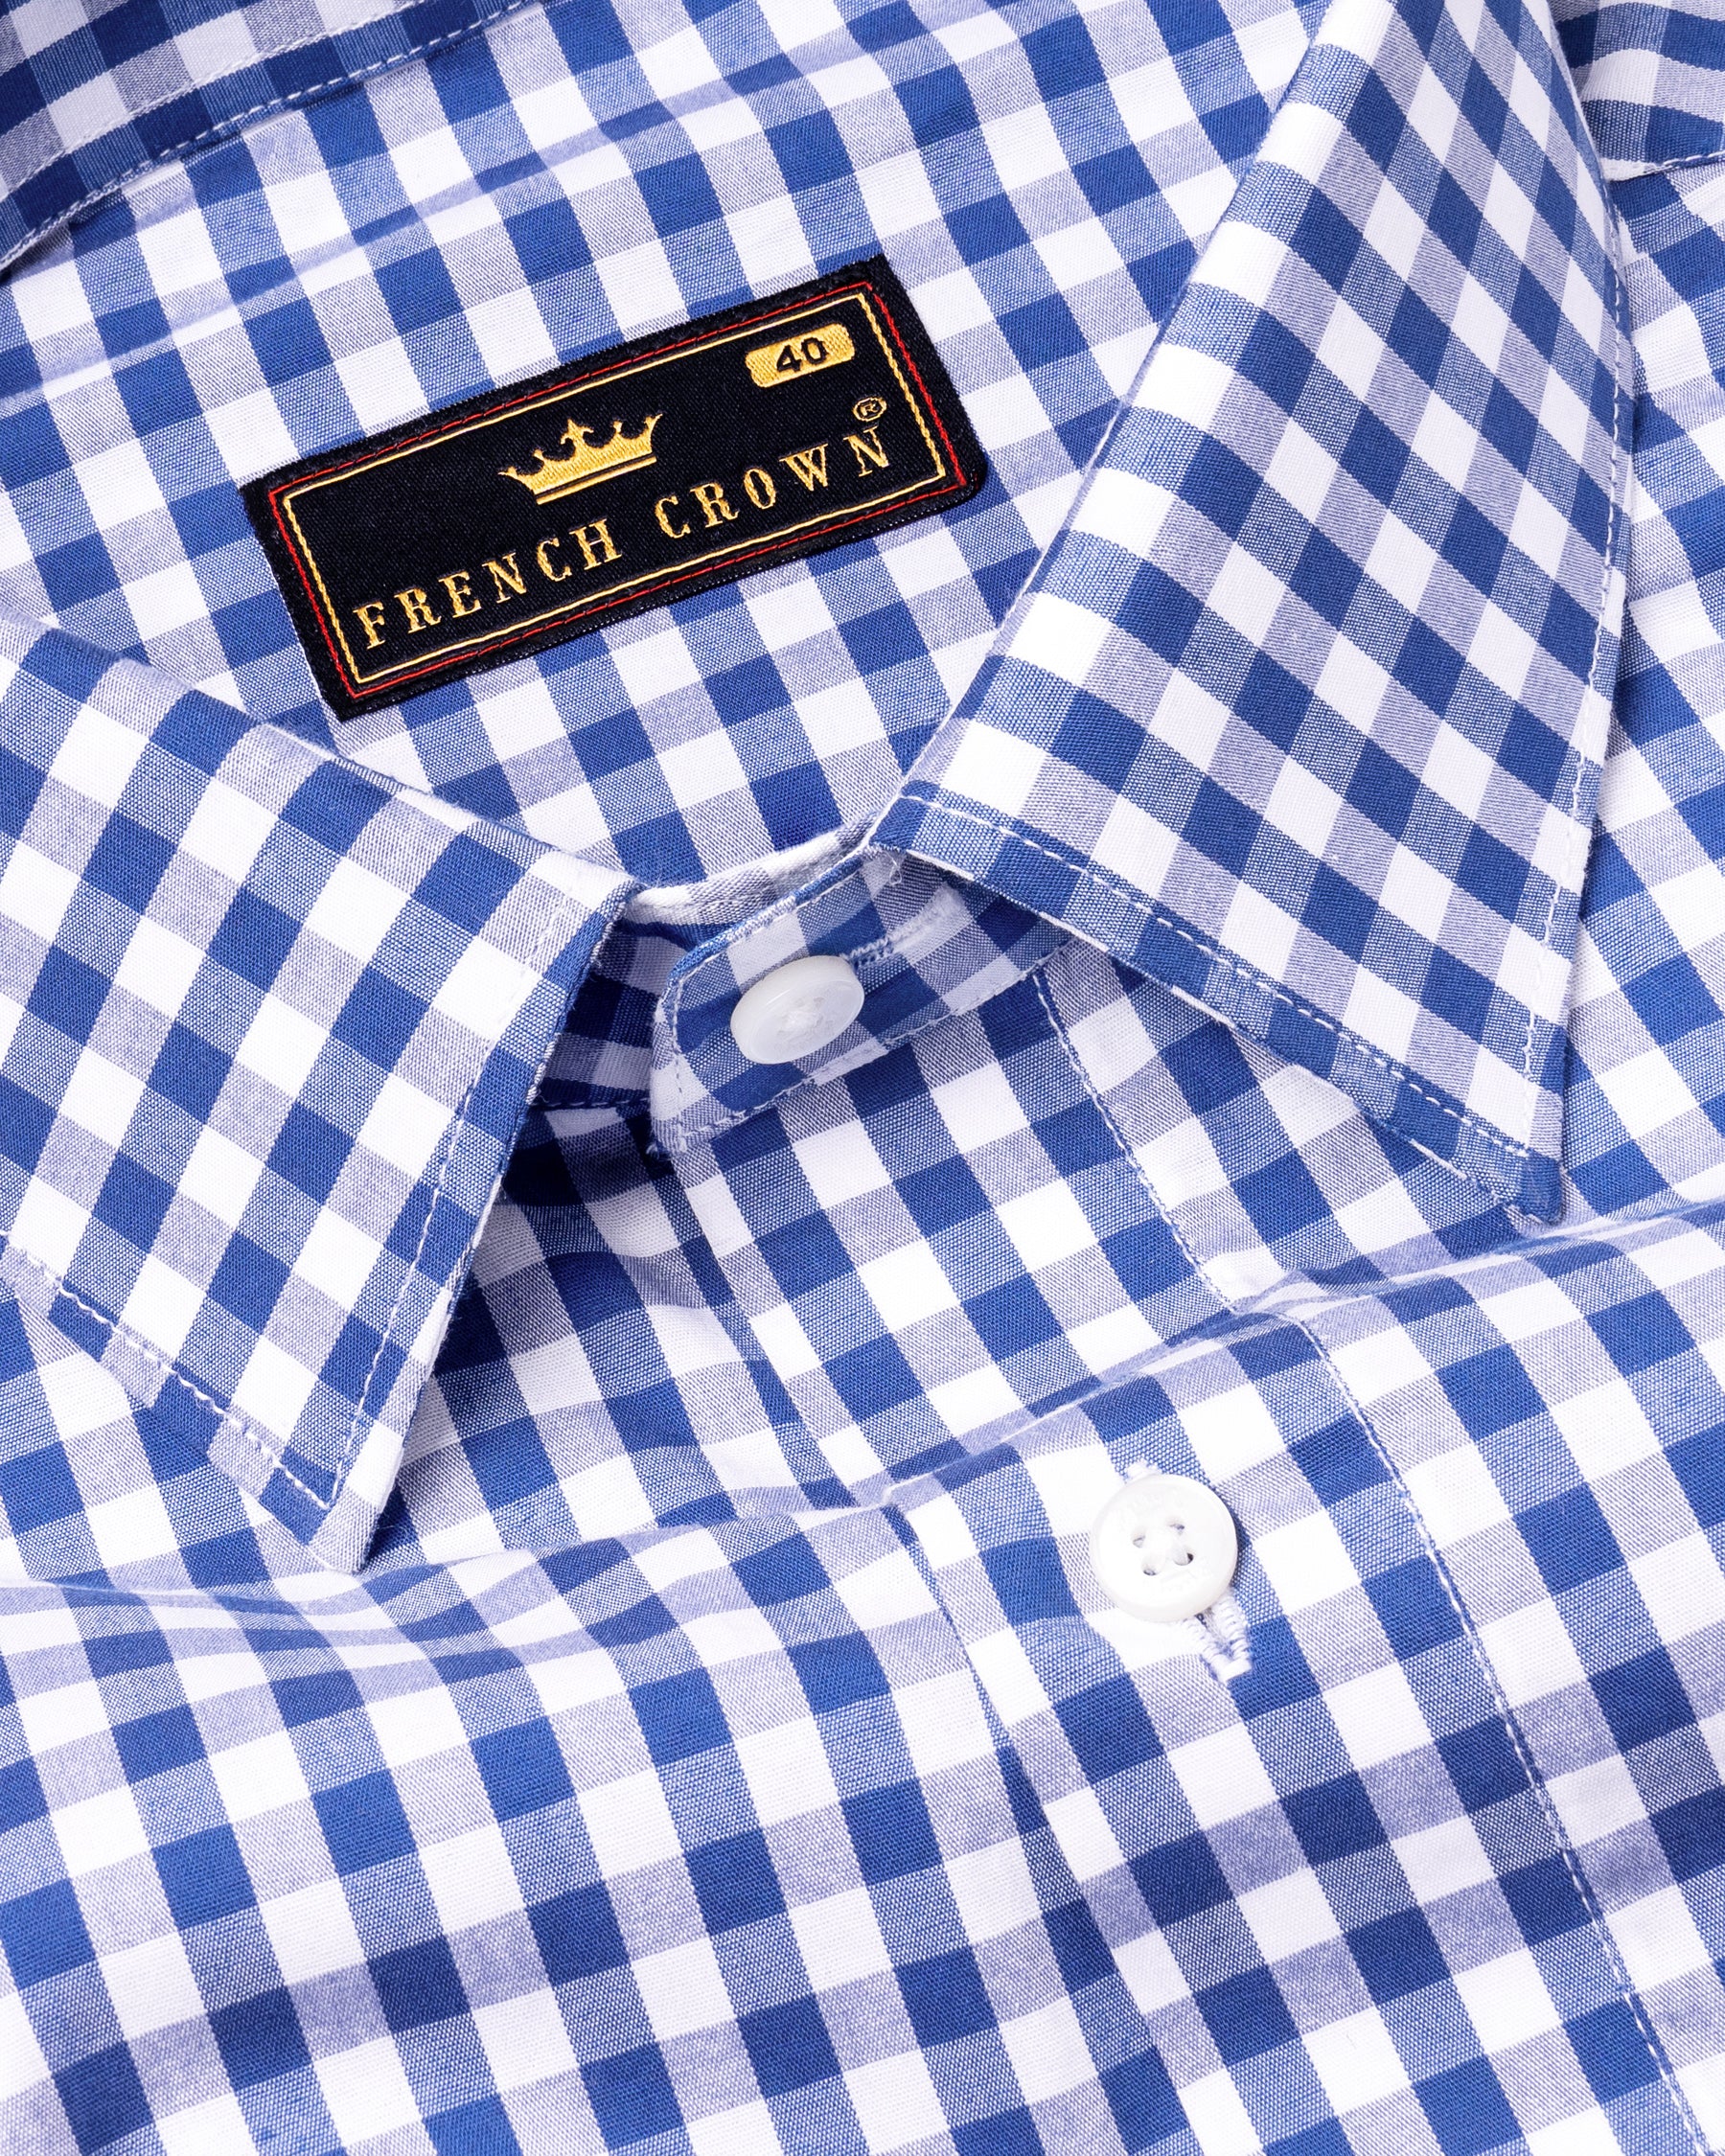 Blue with White Gingham checked Premium Cotton shirt 4978-38,4978-H-38,4978-39,4978-H-39,4978-40,4978-H-40,4978-42,4978-H-42,4978-44,4978-H-44,4978-46,4978-H-46,4978-48,4978-H-48,4978-50,4978-H-50,4978-52,4978-H-52